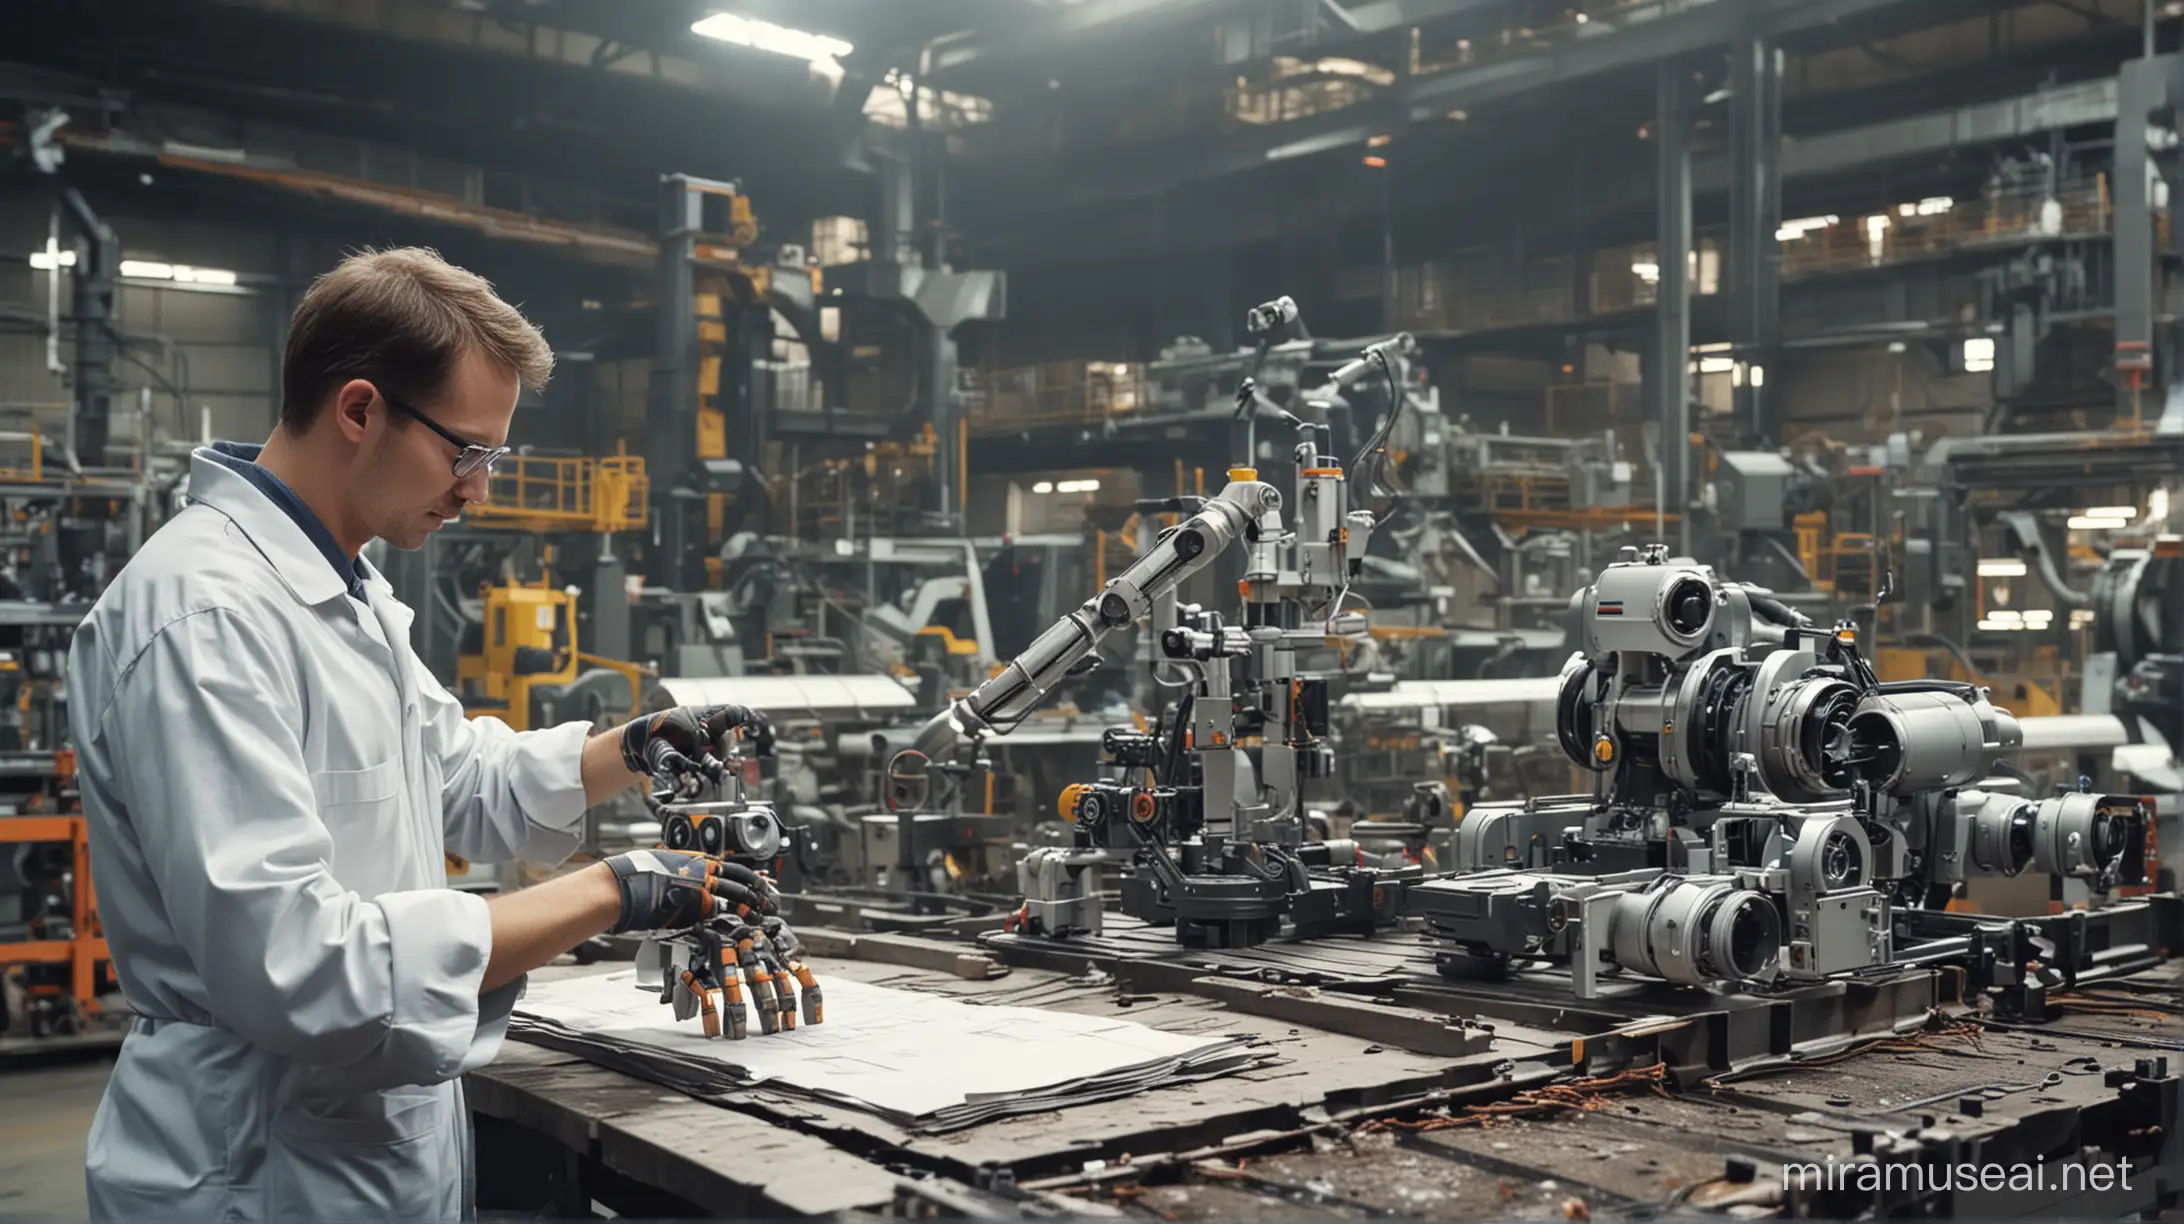 A technician working in a paper mill environment. The technician should be shown engaged in a specific task. Next to the technician, position a small robot designed to assist with tasks in the paper mill. This robot should be animated and enthusiastic.